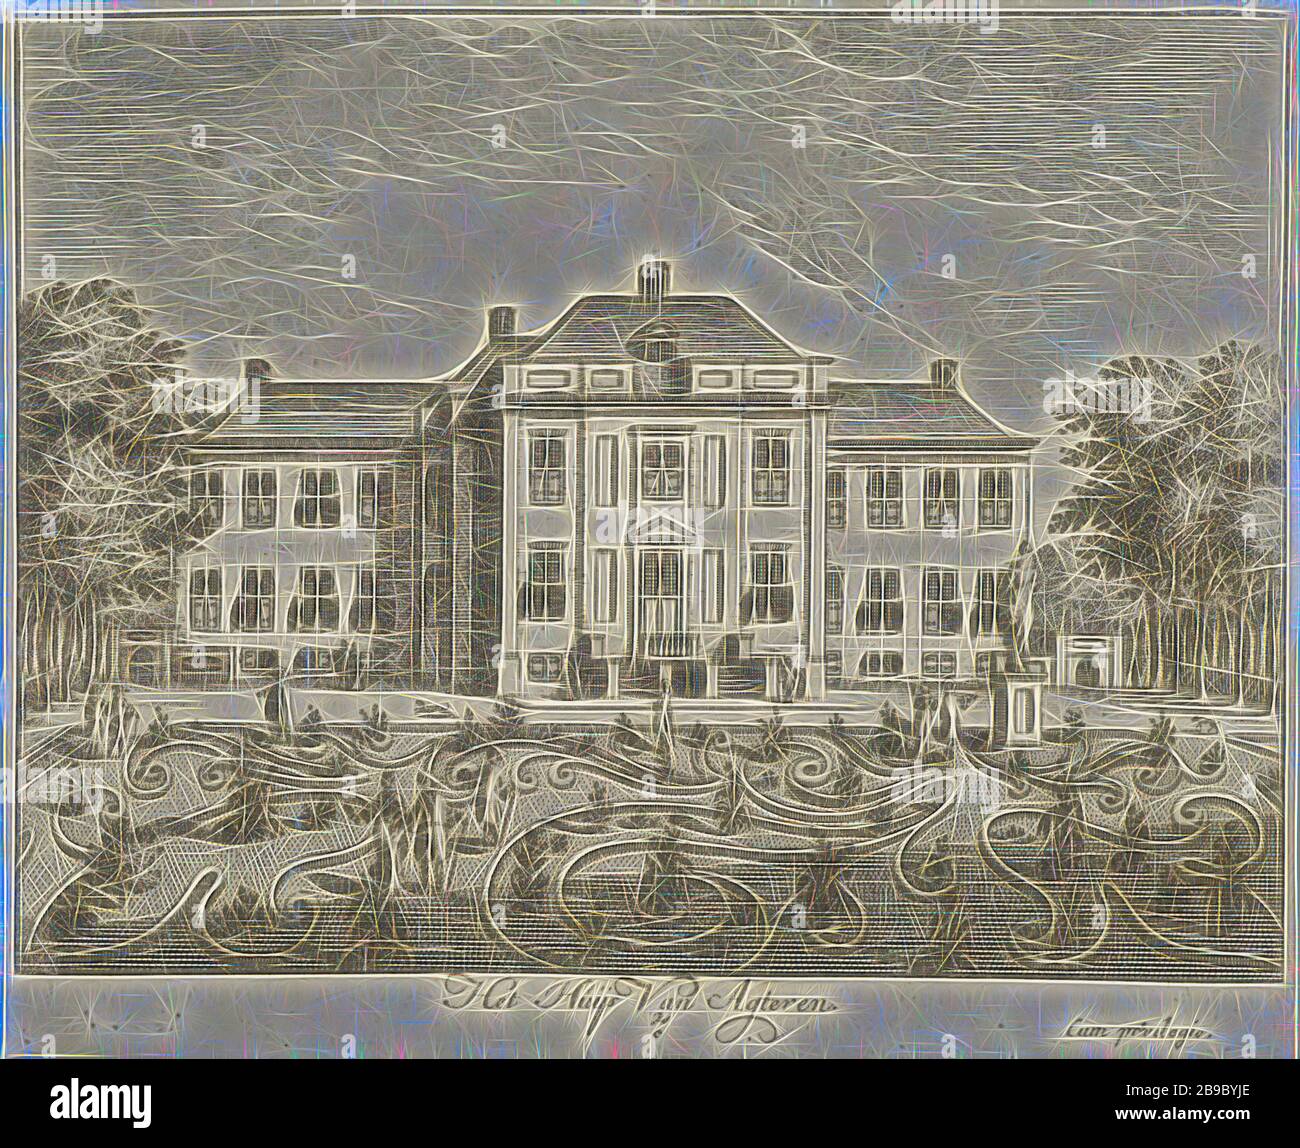 Rear facade of Soestdijk Palace The Huijs Van Agteren (title on object) General Image Vant Lust-Huijs and Hof van sijn Royal Majesty of Great Britain t Soest-Dijk (series title), View of the rear facade of Soestdijk Palace with walking figures in the landscaped garden. The print is part of a series with sixteen faces on Soestdijk Palace and the accompanying estate, palace, French or architectonic garden, formal garden, Soestdijk Palace, Hendrik de Leth, 1725 - 1747, paper, etching, h 131 mm × w 160 mm, Reimagined by Gibon, design of warm cheerful glowing of brightness and light rays radiance. Stock Photo